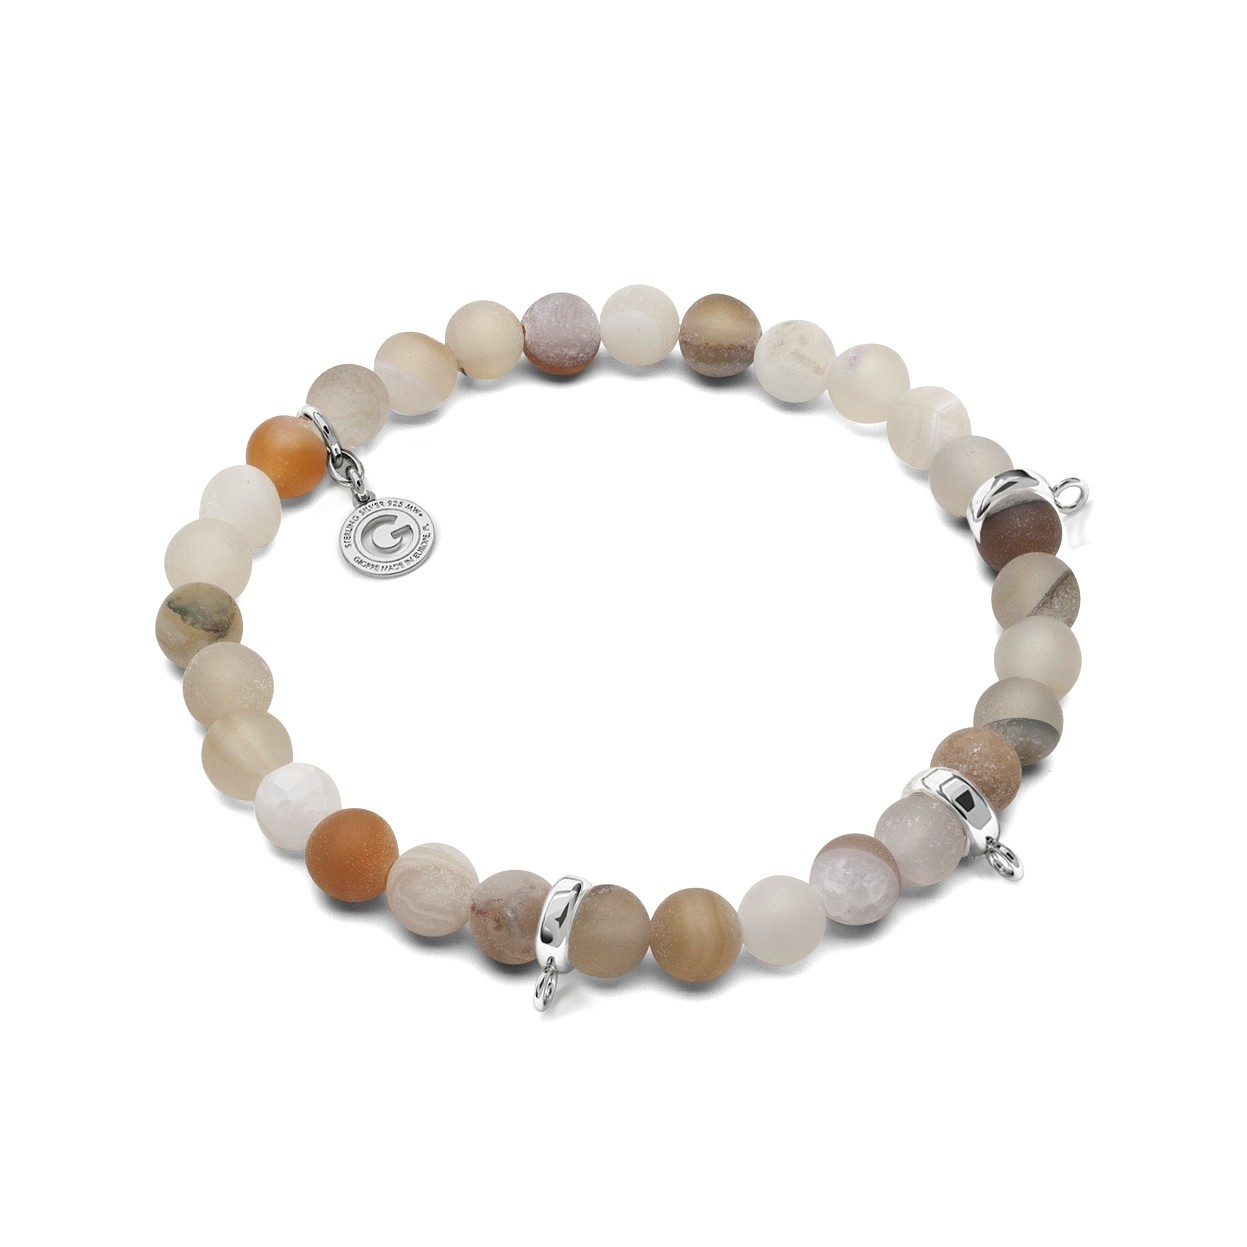 AGATE PALE, FLEXIBLE BRACELET FOR 3 CHARMS, WITH NATURAL STONES